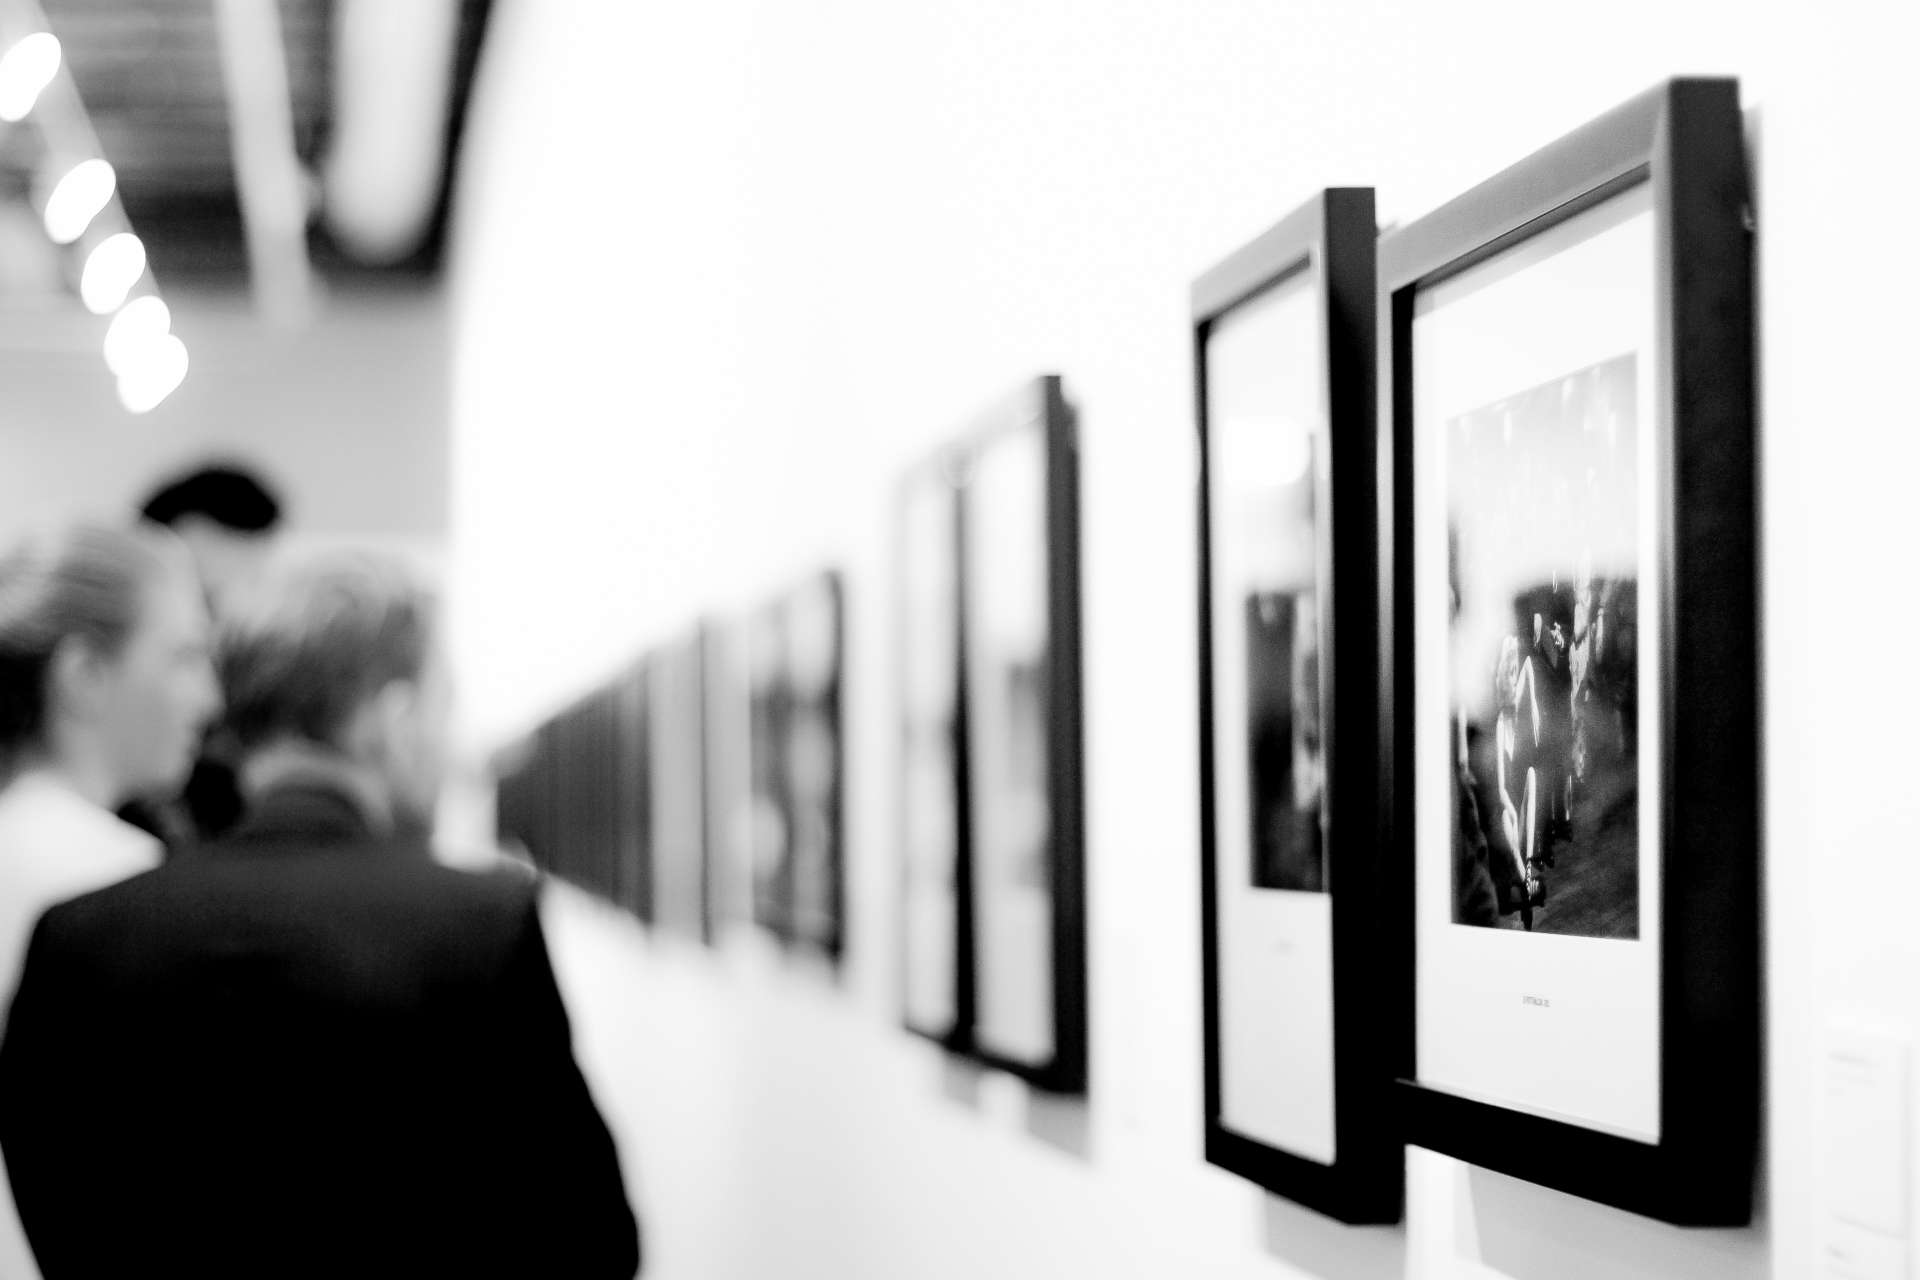 people viewing photographs at an art exhibit